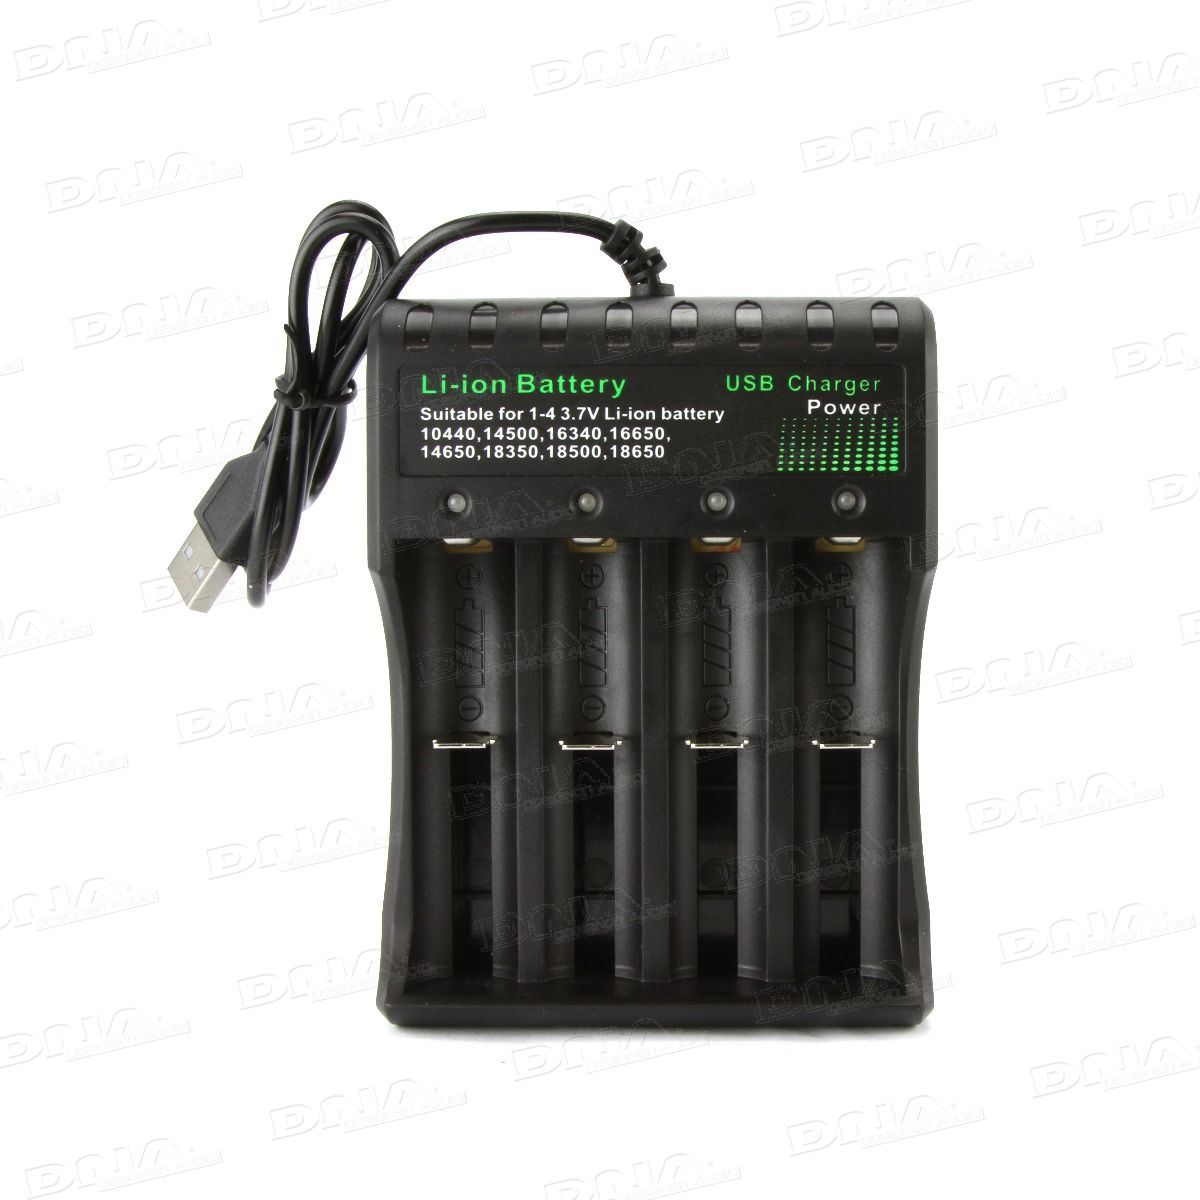 18650 Battery USB Charger - 4 Slot